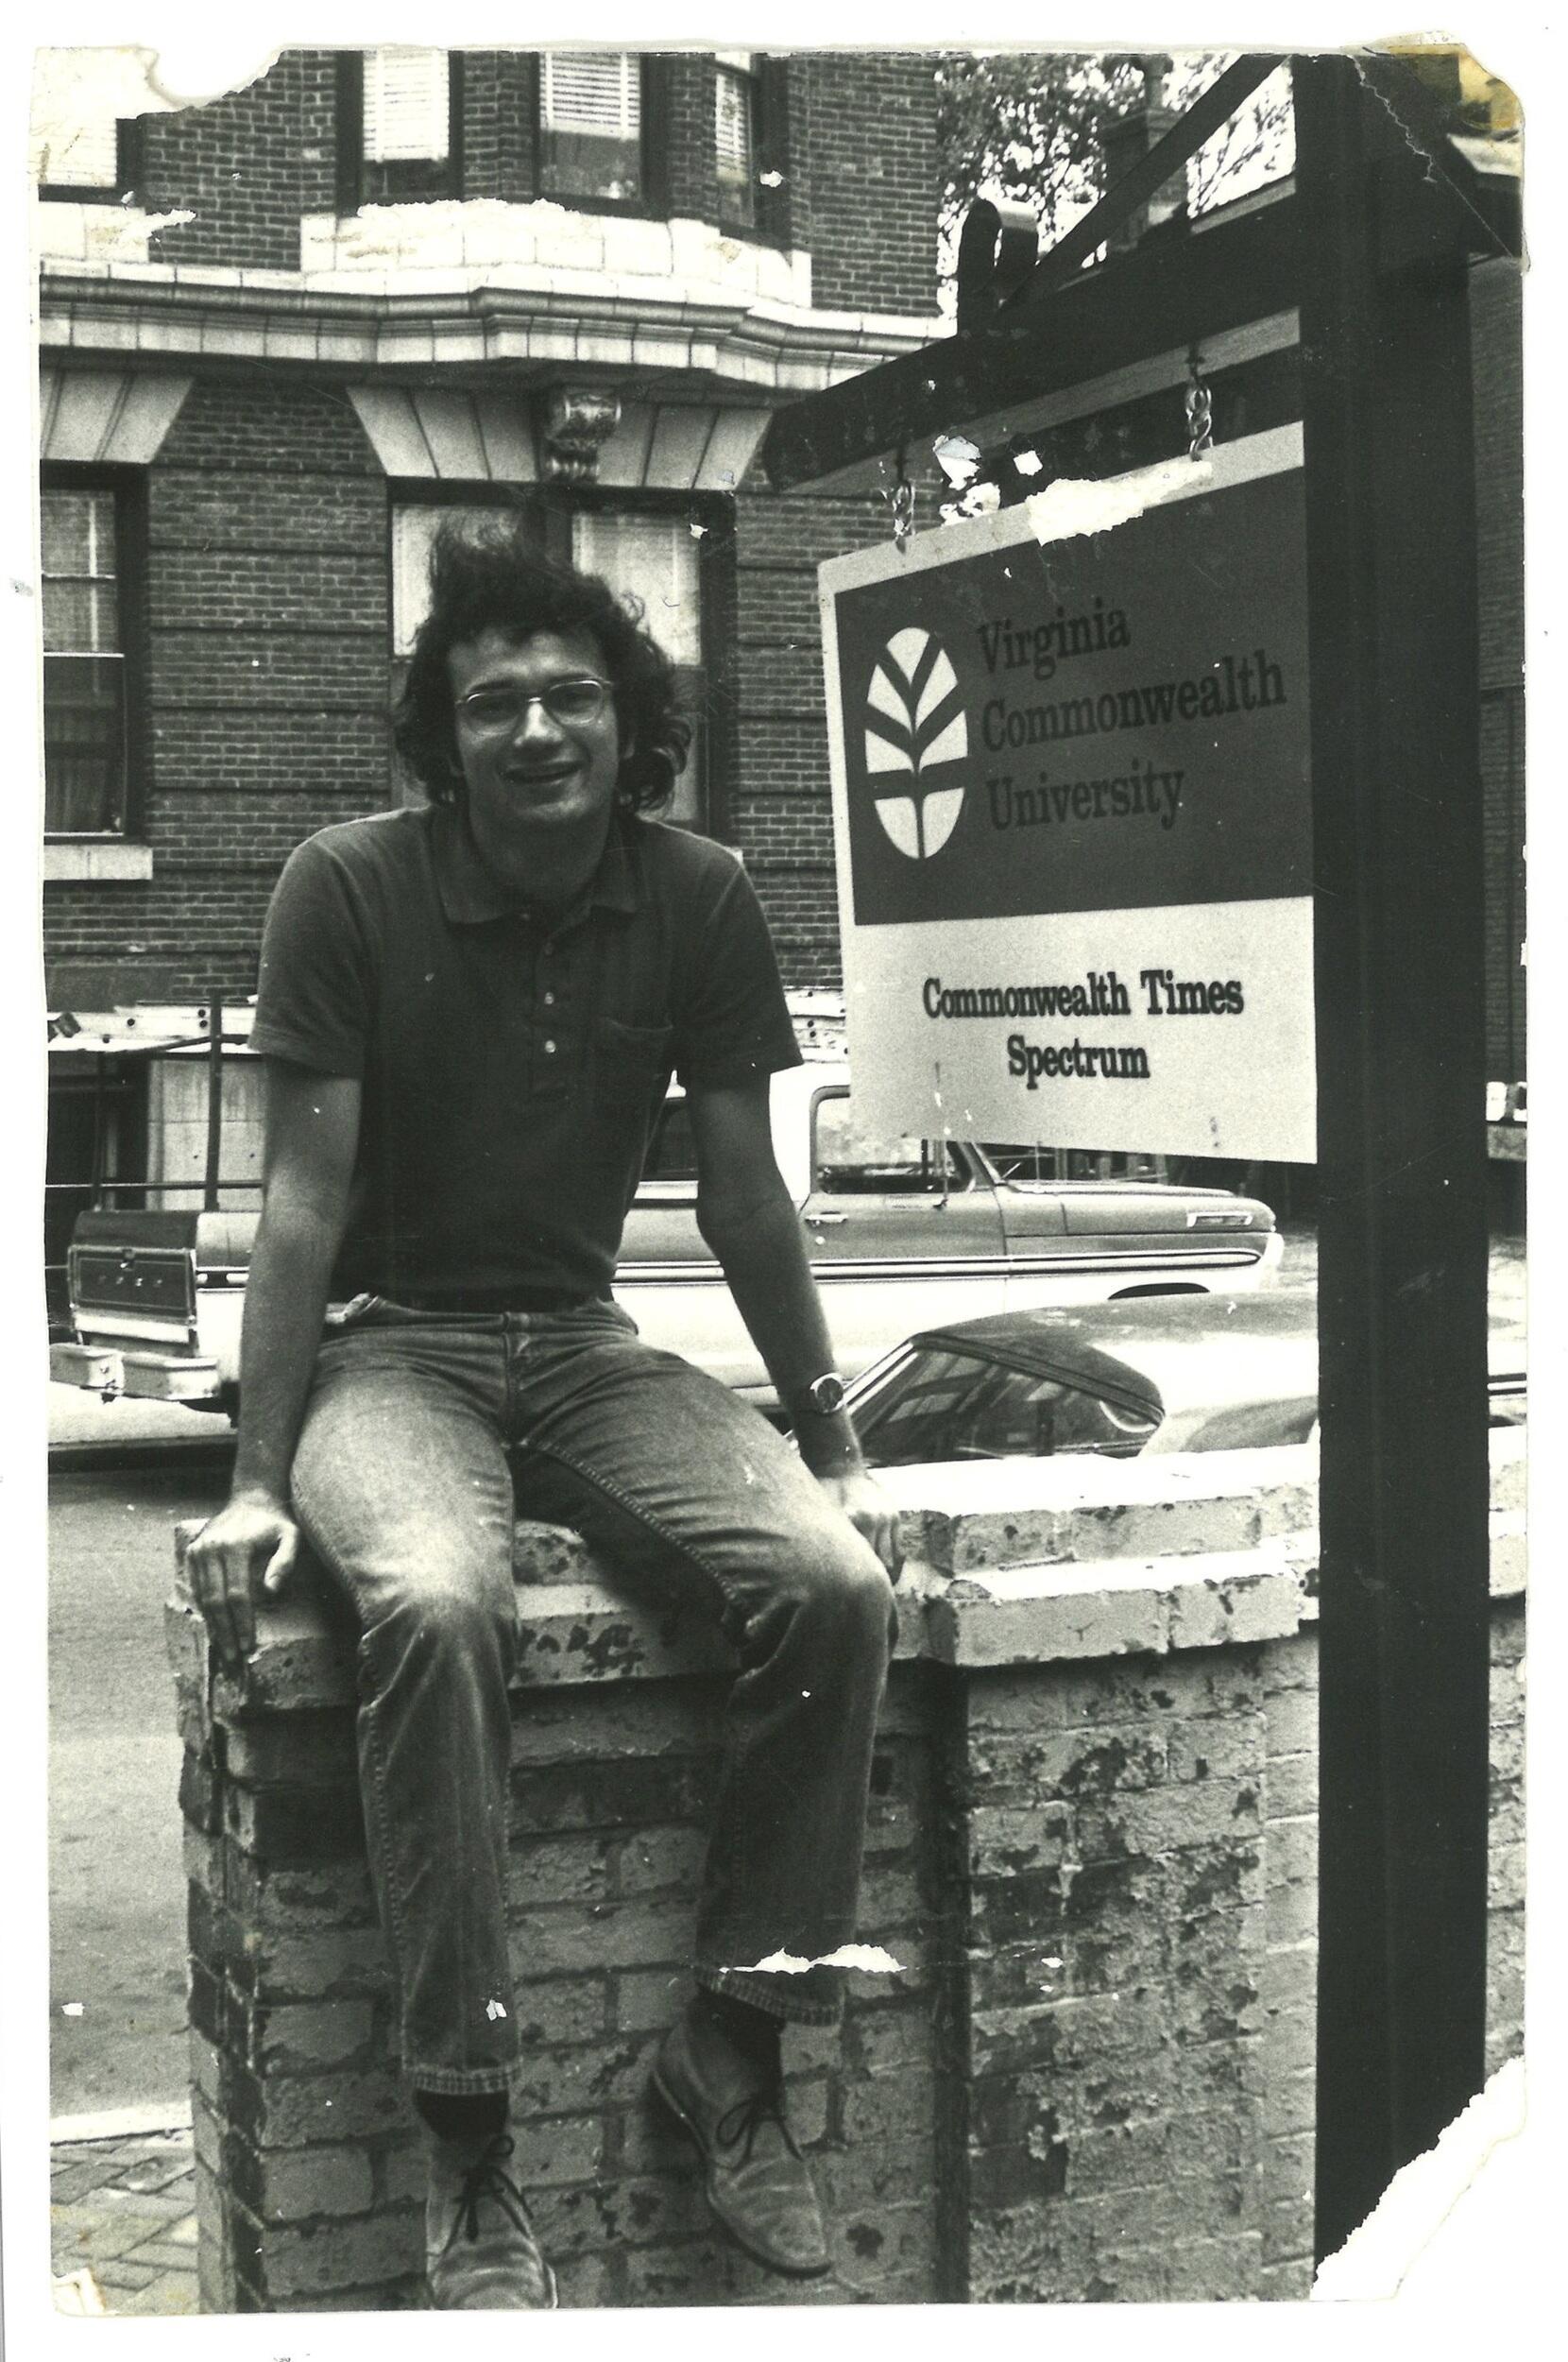 A black and white photo of a man sitting on a brick fence. Next to him is a sign that says \"Virginia Commonwealth University, Commonwealth Times, Spectrum.\" 